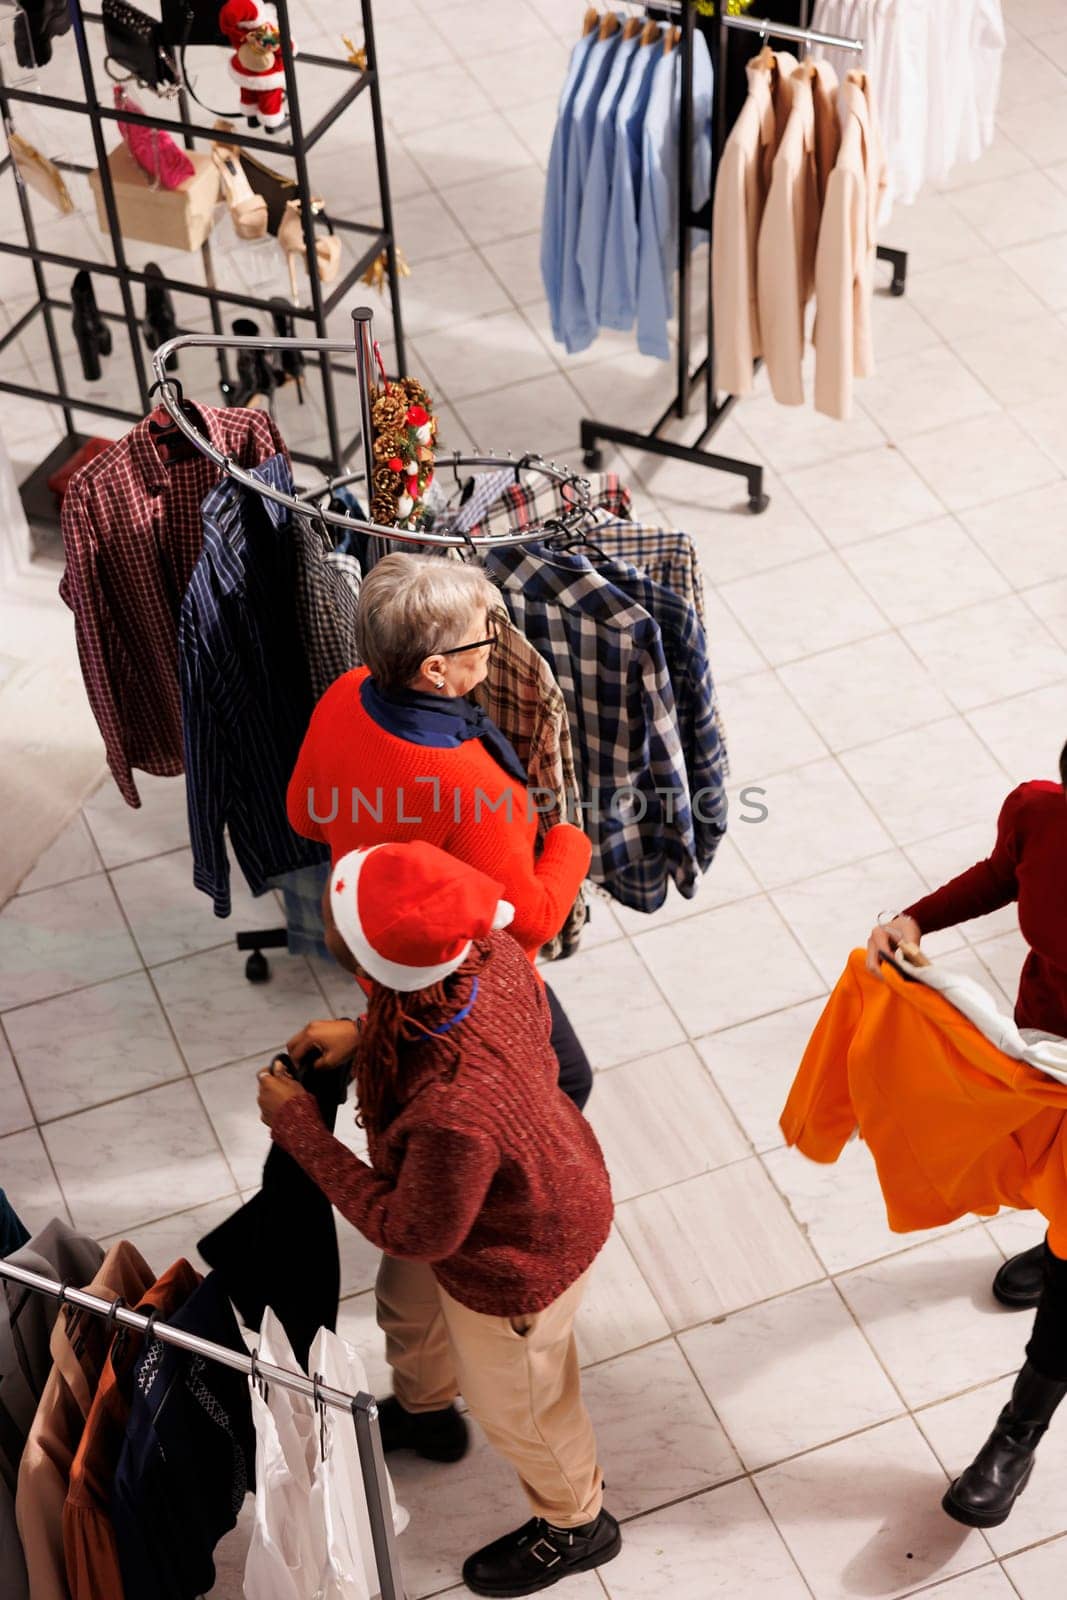 People making preparations for Christmas Eve activities and customs, customers looking for seasonal presents and festive attire. Shoppers at boutiques purchase goods in december.